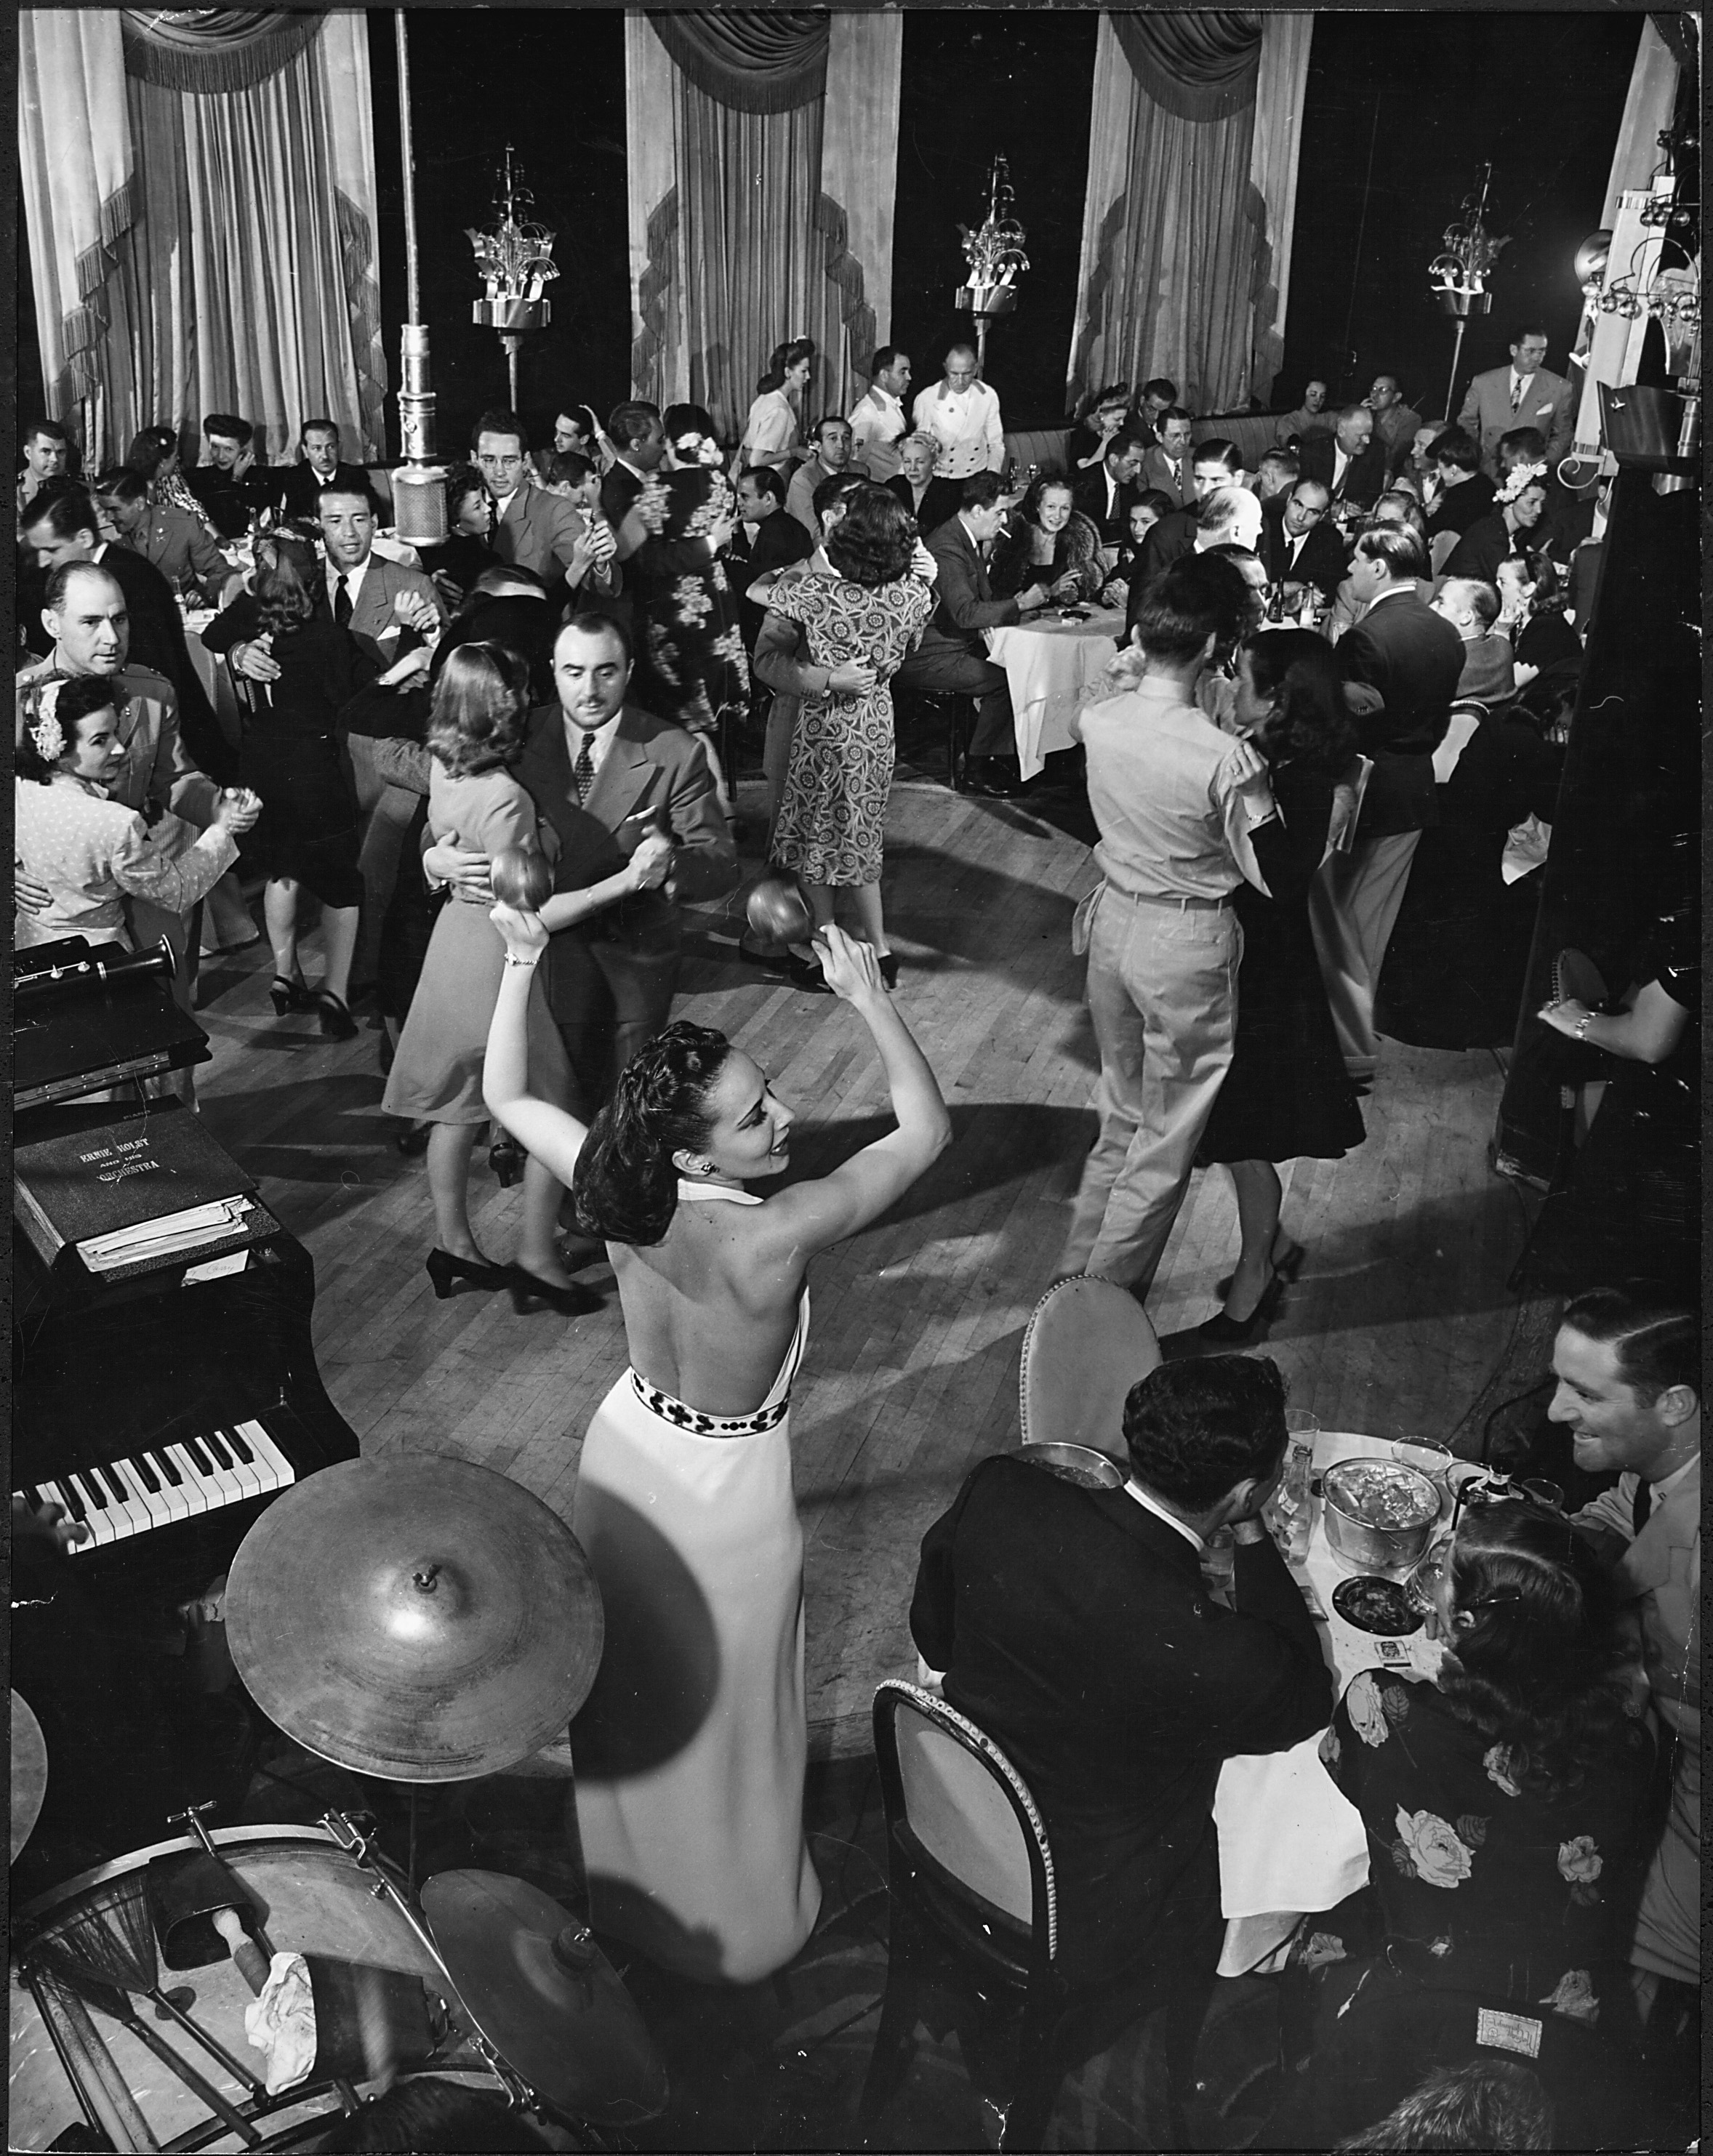 Patrons dine and dance to Ecita (with maracas in the air) and her orchestra in the Stork Club dining room in 1944.